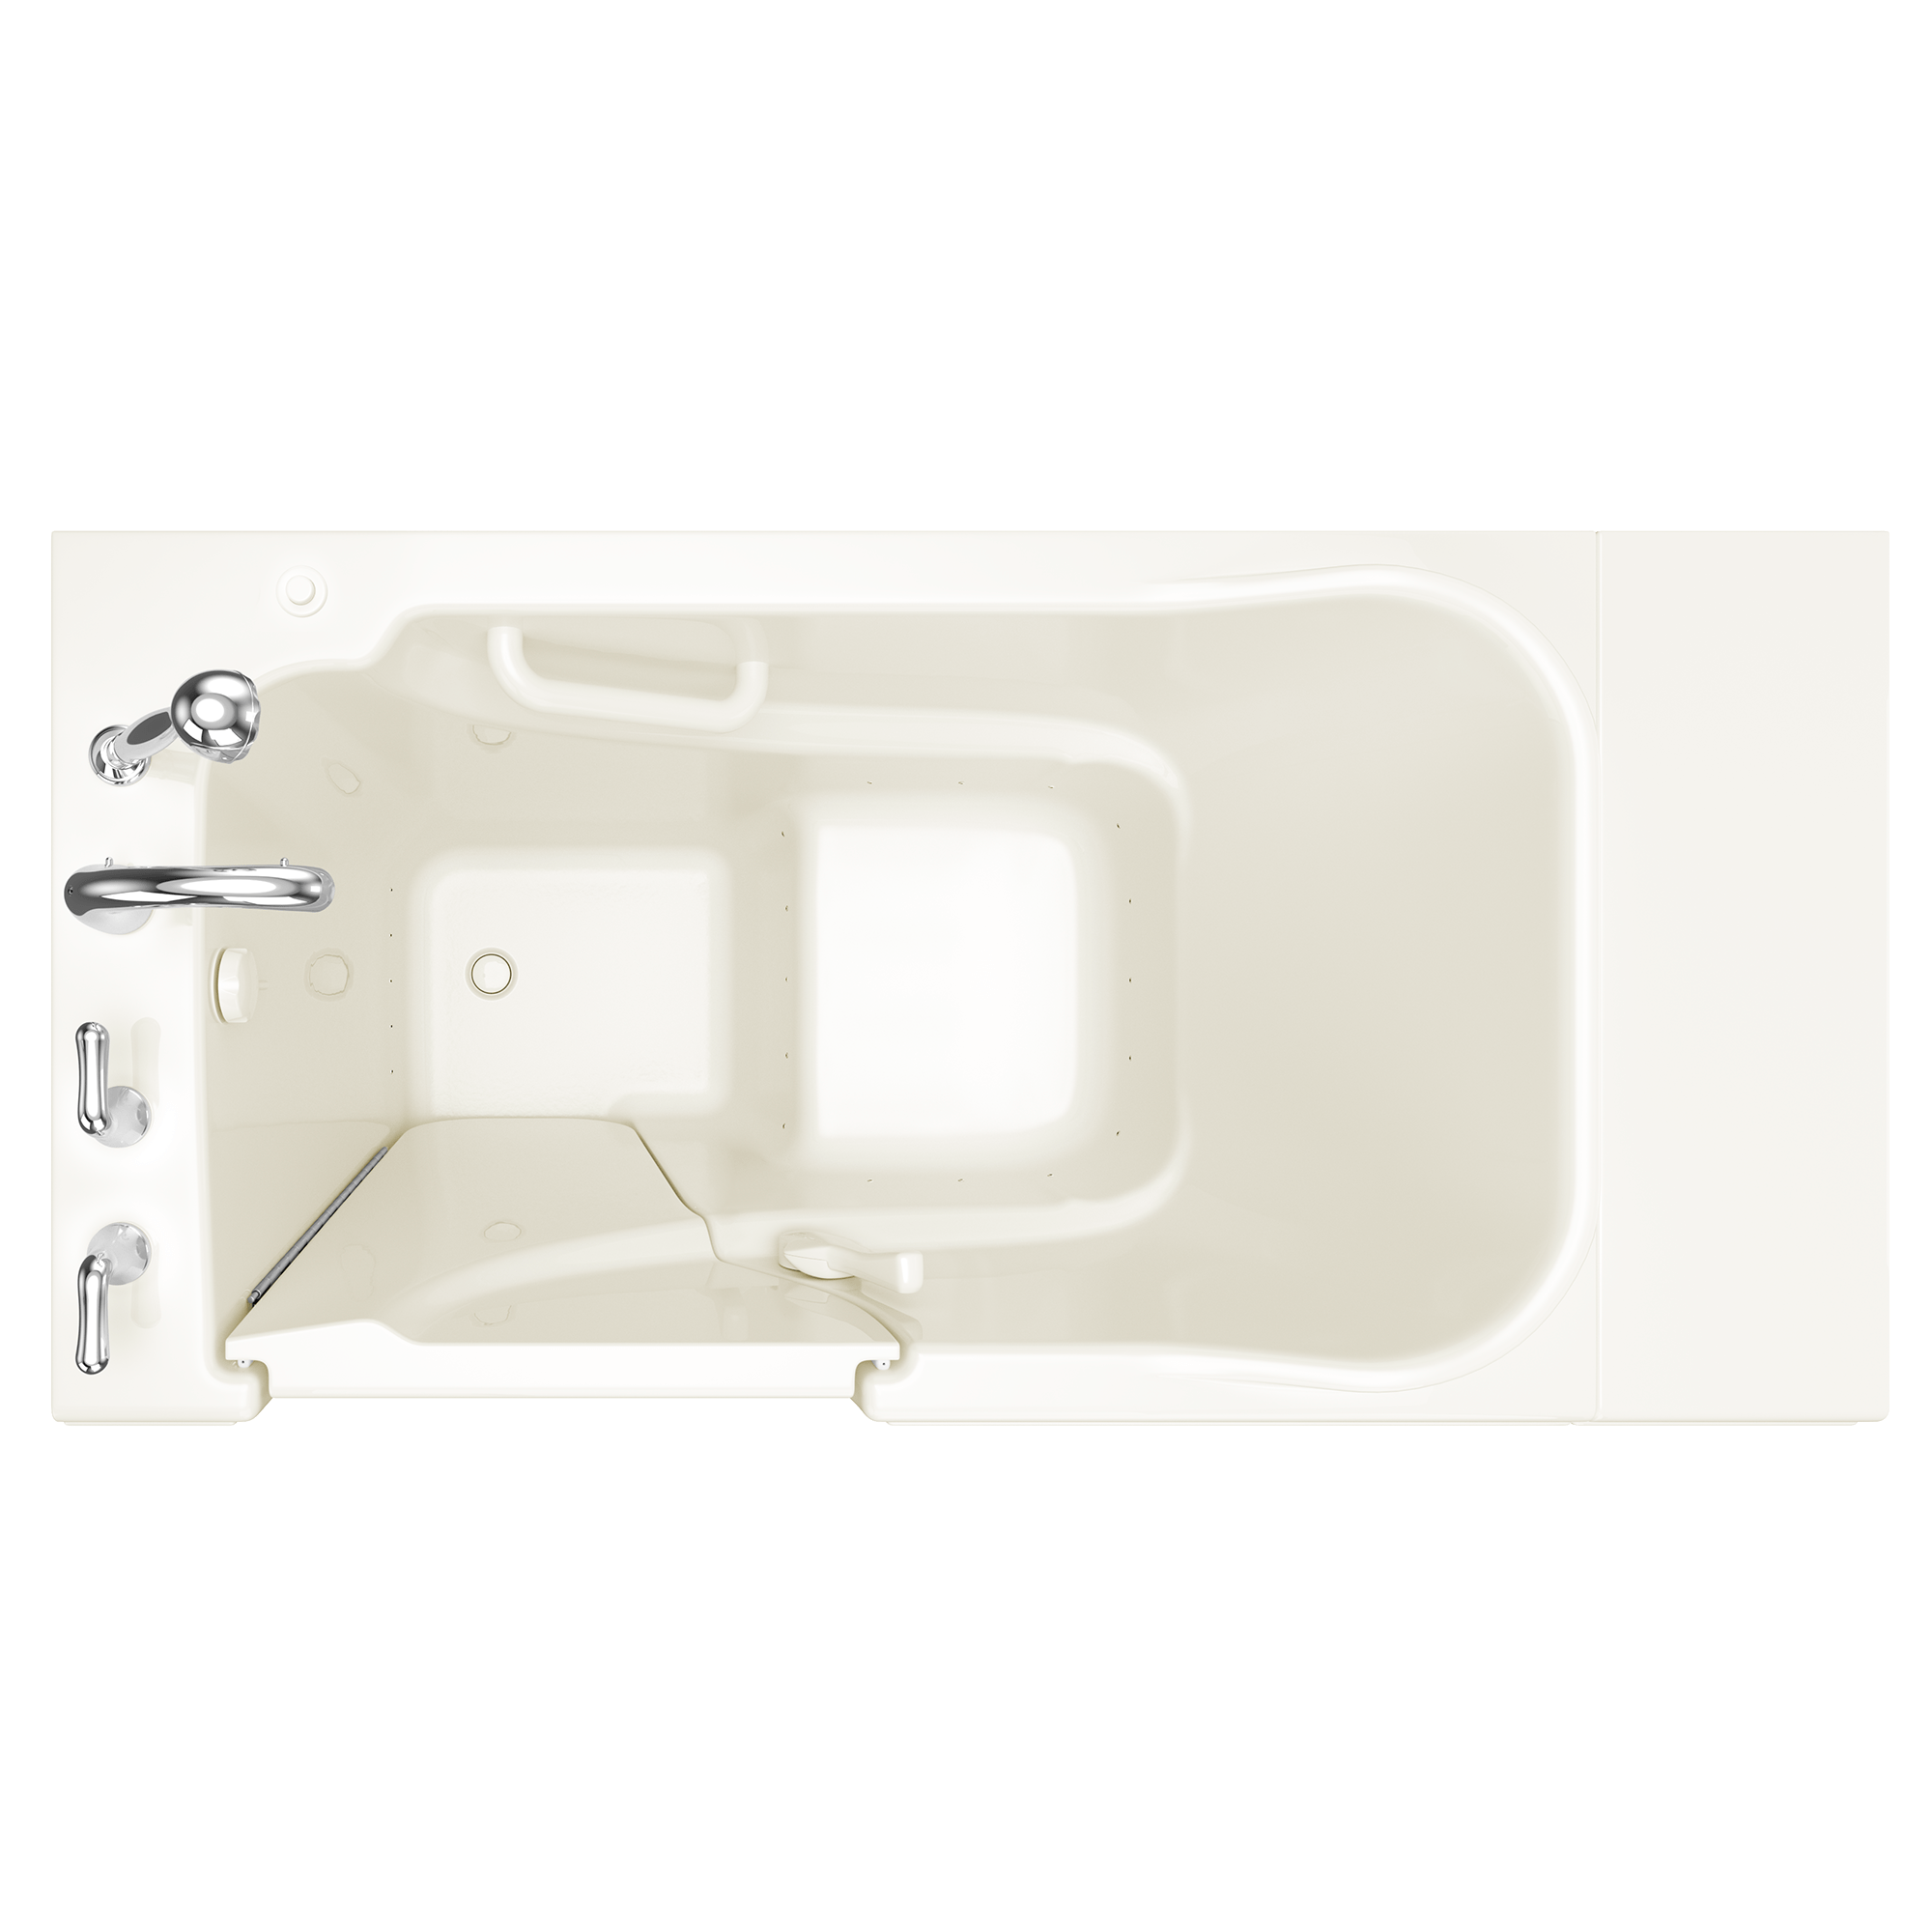 Gelcoat Entry Series 52 x 30 Inch Walk In Tub With Air Spa System - Left Hand Drain With Faucet BISCUIT